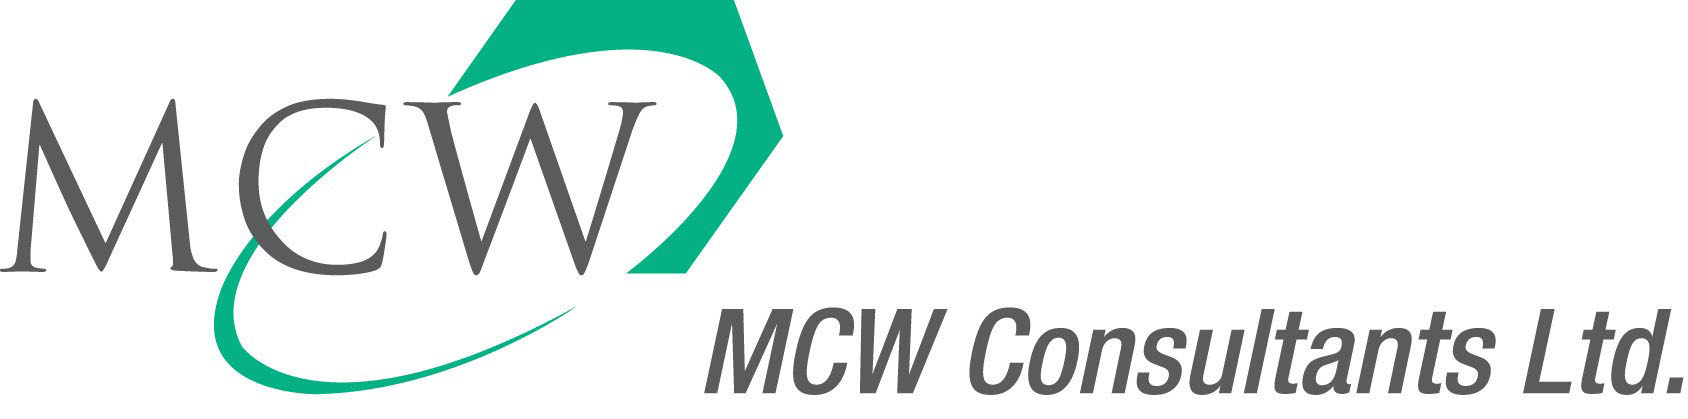 MCW consulting.jpg